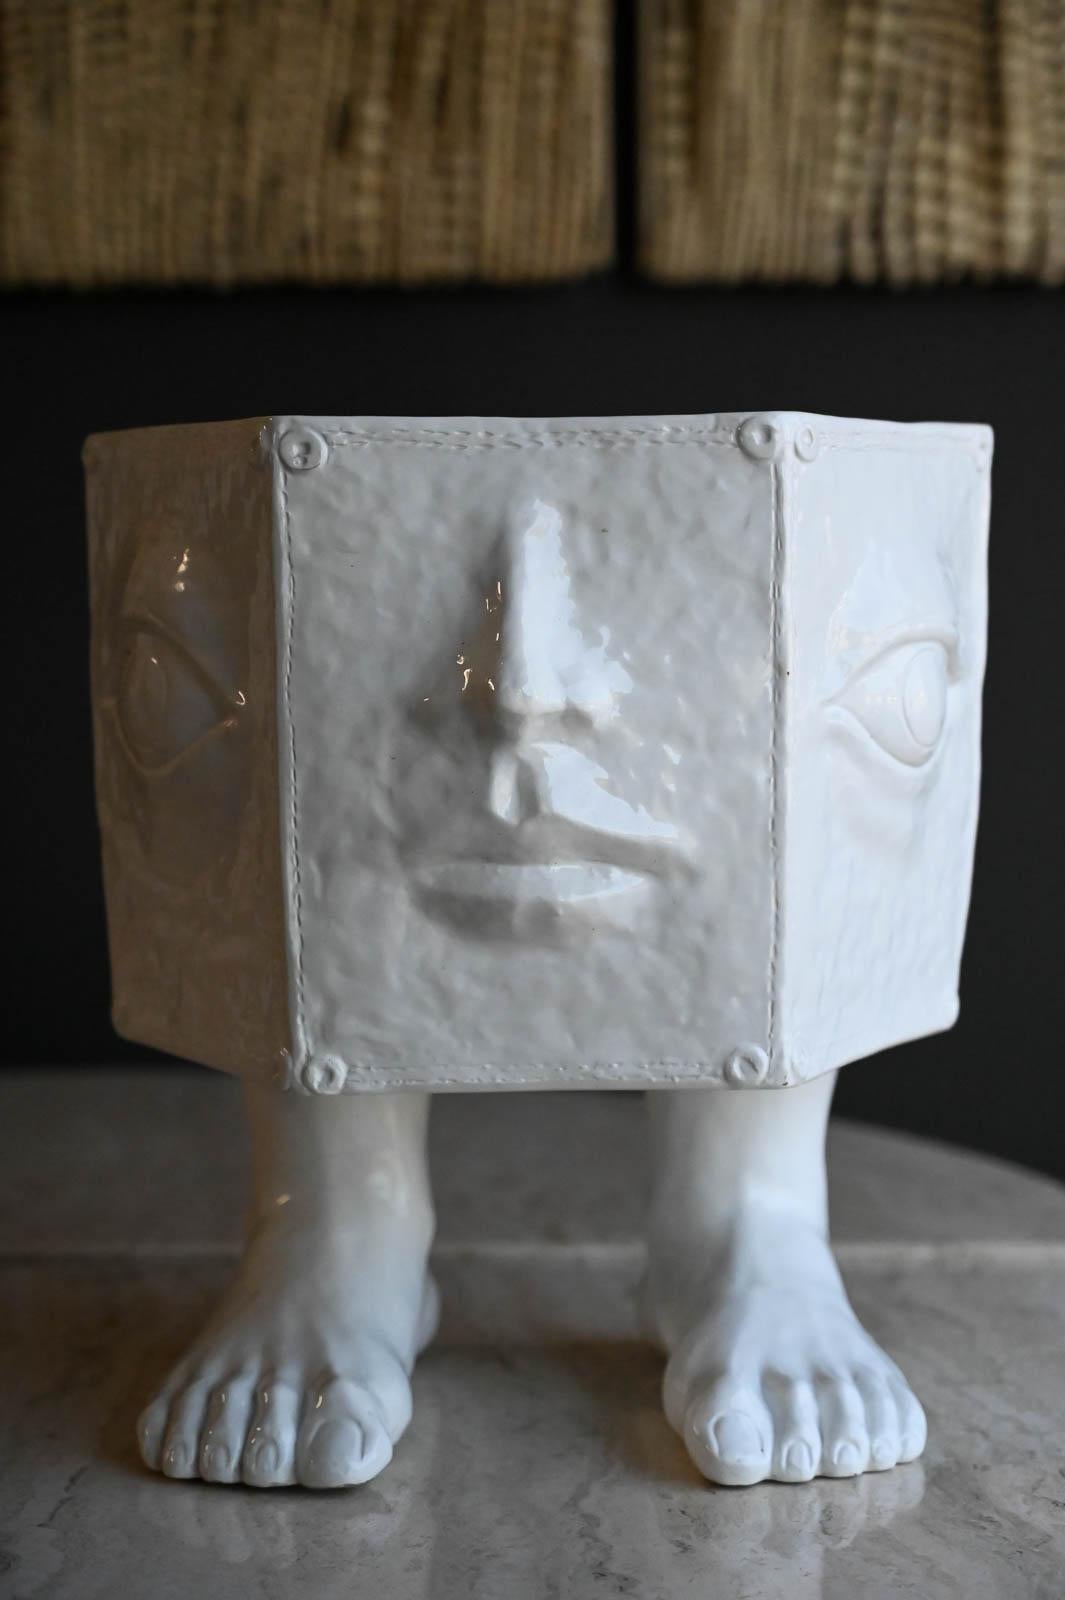 Porcelain Face and Foot Planter by Taste Setter Sigma Italy, ca. 1970.  Beautiful white glazed porcelain face and footed vase/planter.  Excellent original condition with no chips or cracks.  Each side has a different motif of nose, eyes, ears,